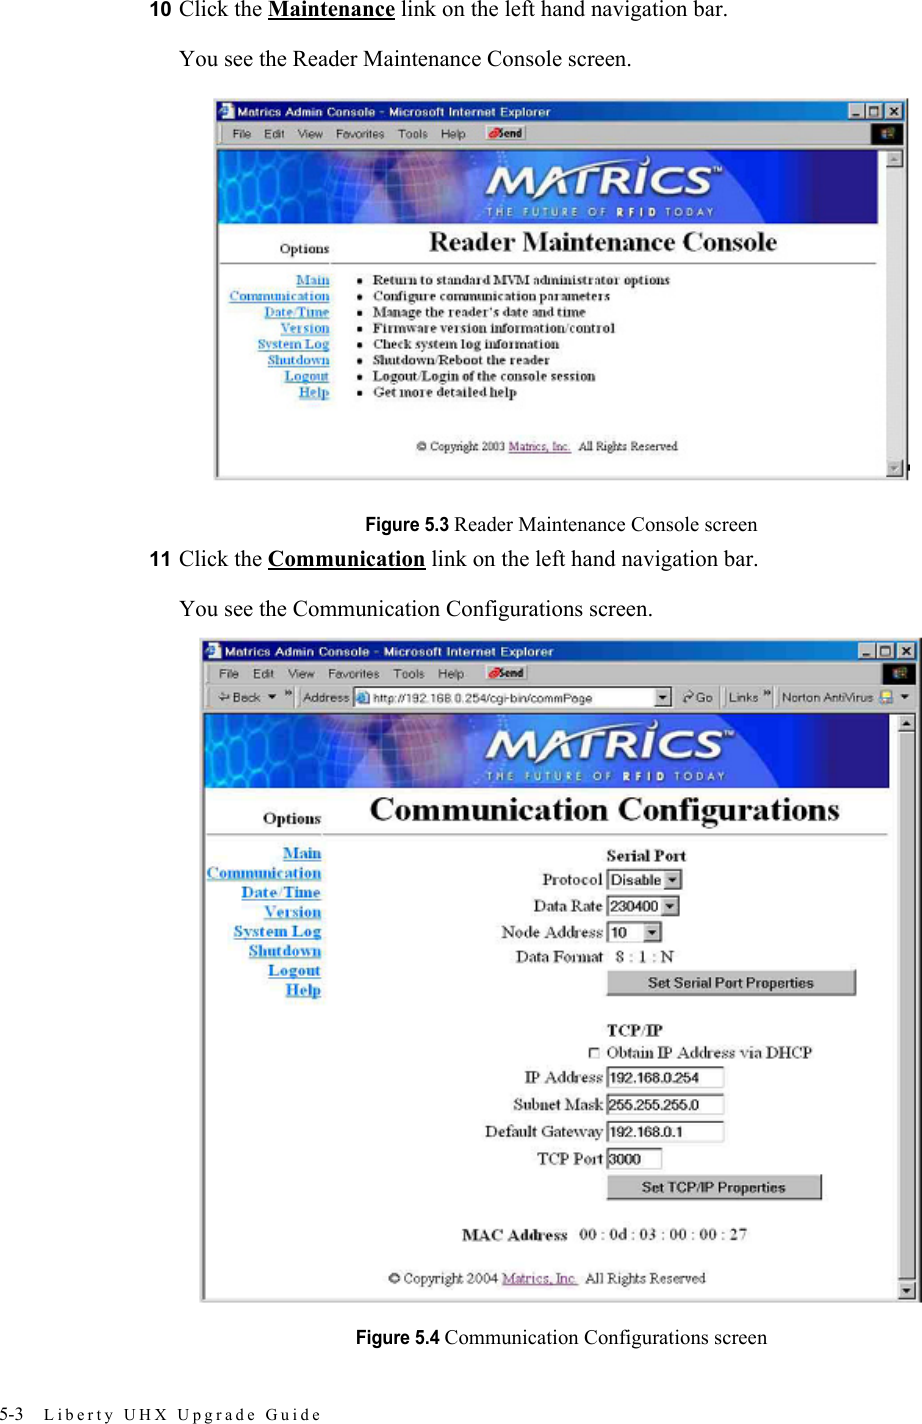 5-3 Liberty UHX Upgrade Guide10 Click the Maintenance link on the left hand navigation bar.You see the Reader Maintenance Console screen.Figure 5.3 Reader Maintenance Console screen11 Click the Communication link on the left hand navigation bar.You see the Communication Configurations screen.Figure 5.4 Communication Configurations screen